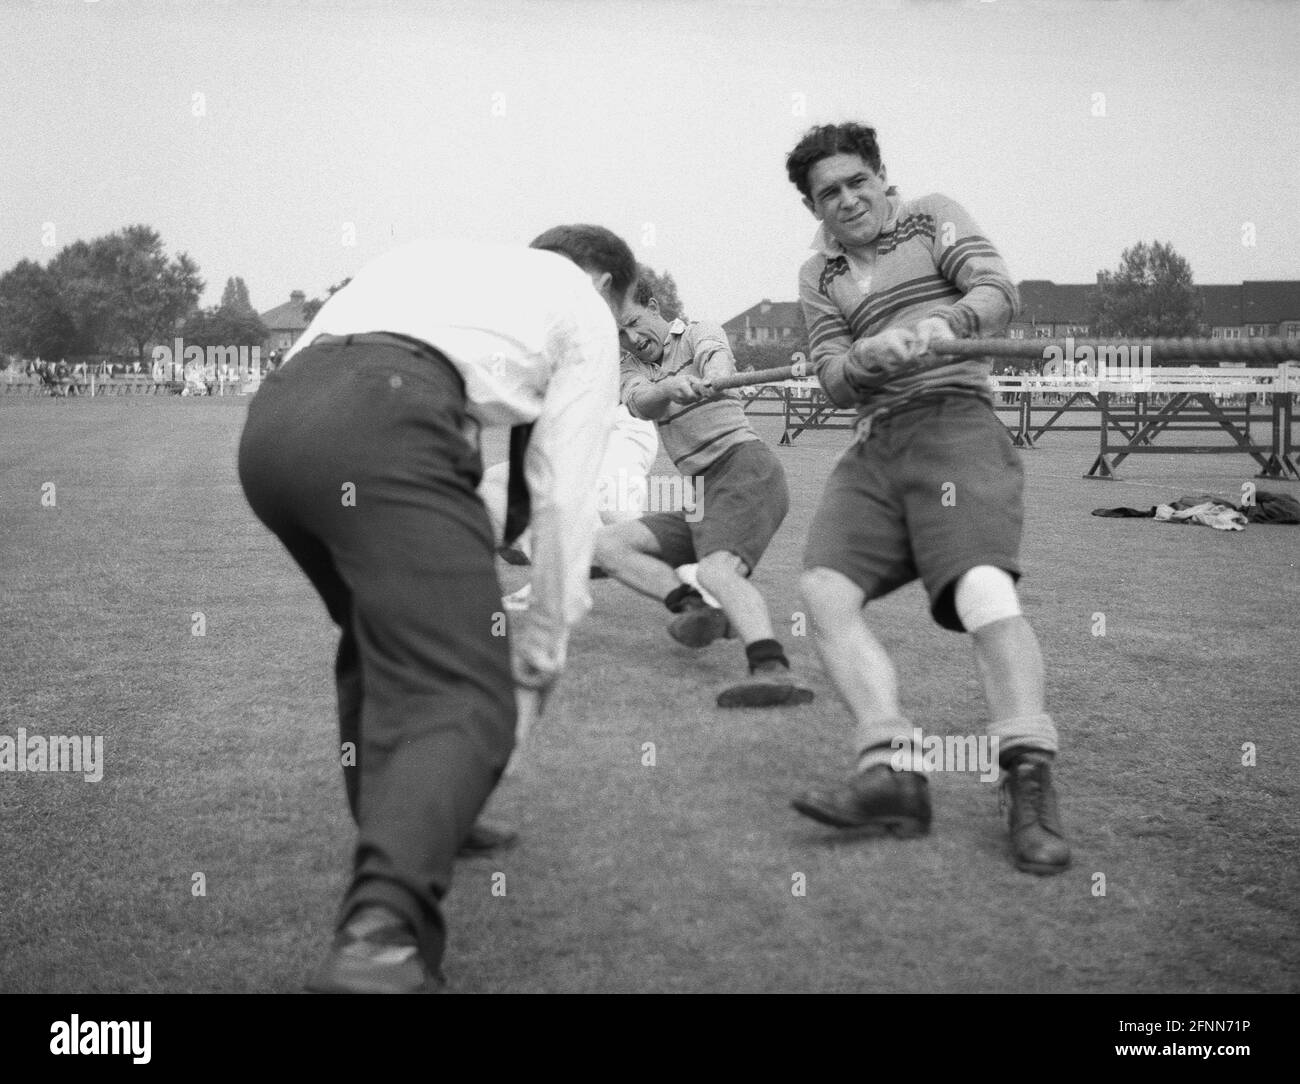 1954, historical, outside in a field, at a civil service sports day, in a tug-of-war contest, a man urging his team to pull harder on the rope, England, UK. An ancient sport, Tug of War which was in the summer Olympic games from 1900 to 1920, is a test of strength between two teams with the goal being to bring the rope a certain distance in one direction against the force of the opposite team's pull. Strong leg and arm muscles are needed. Stock Photo